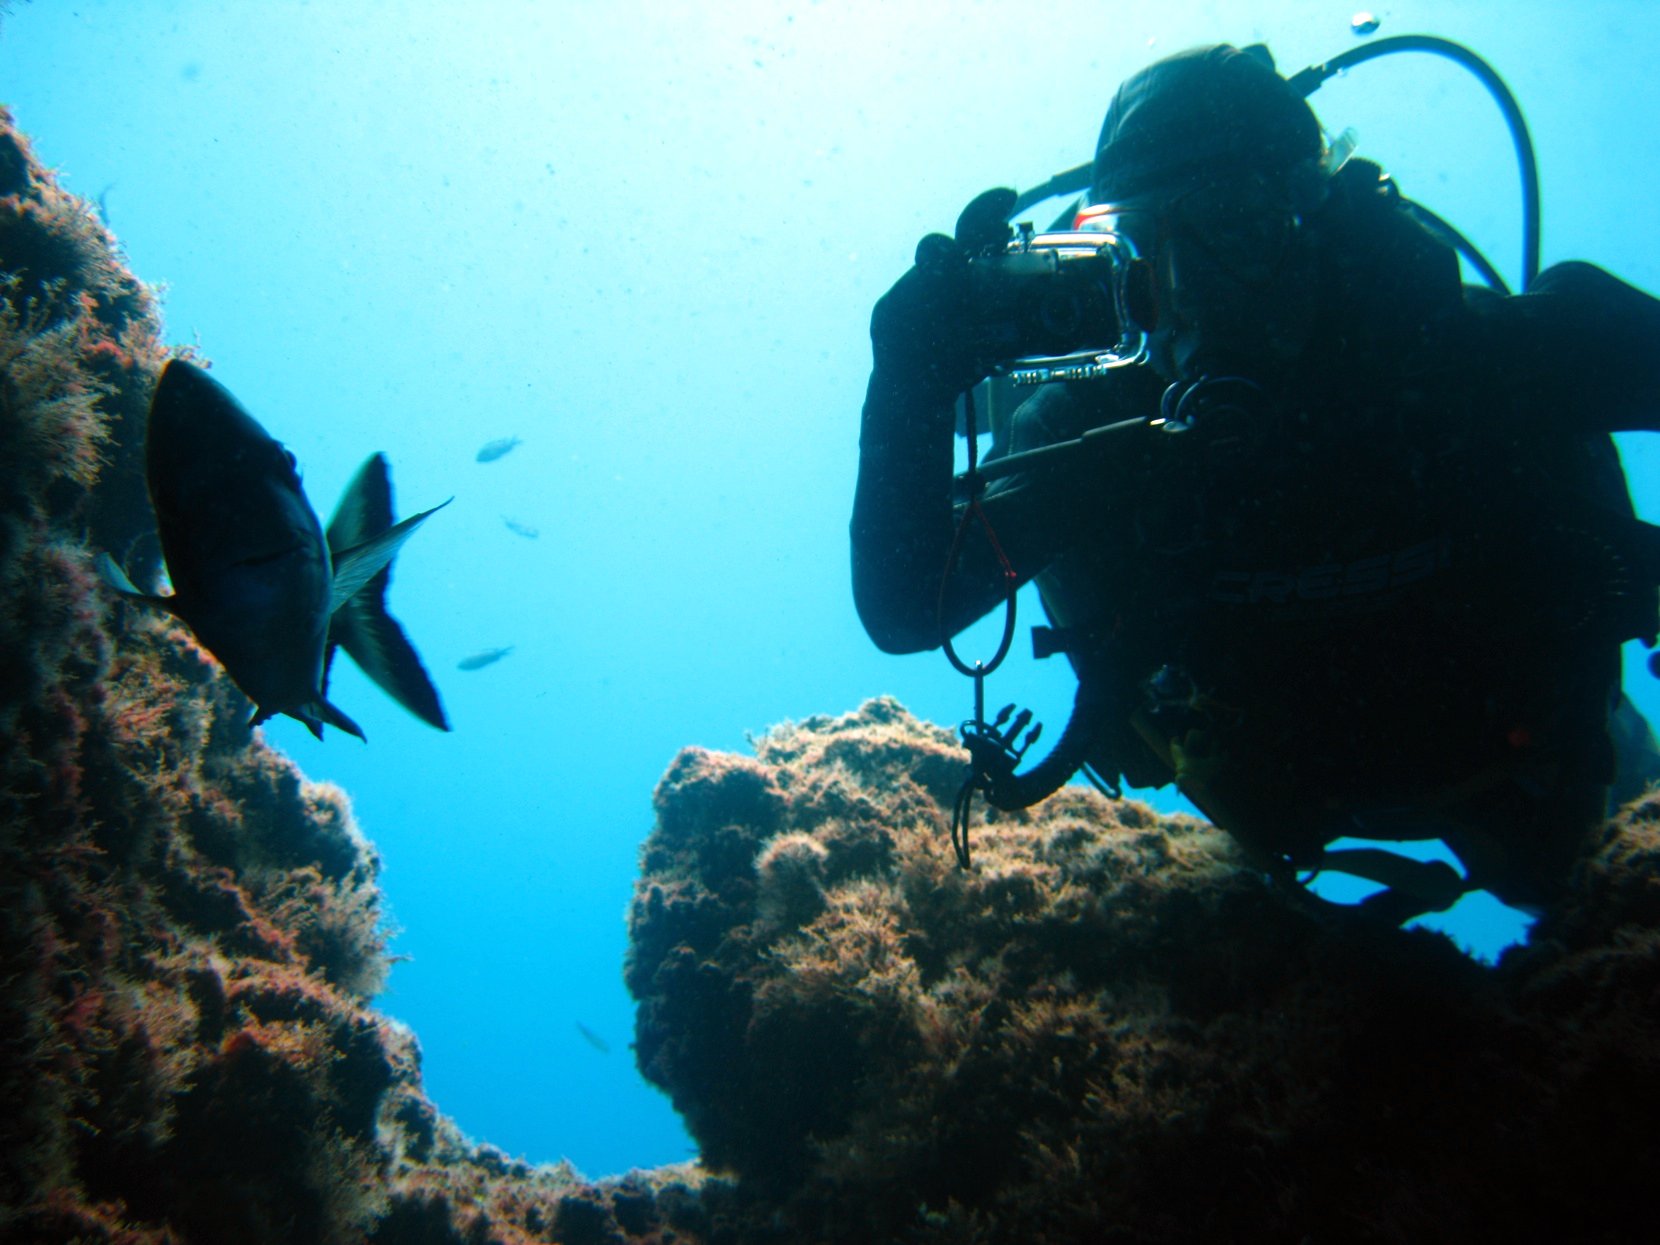 Luís Campos (ENT) participates in a new article on the involvement of divers in the development of sustainable tourism